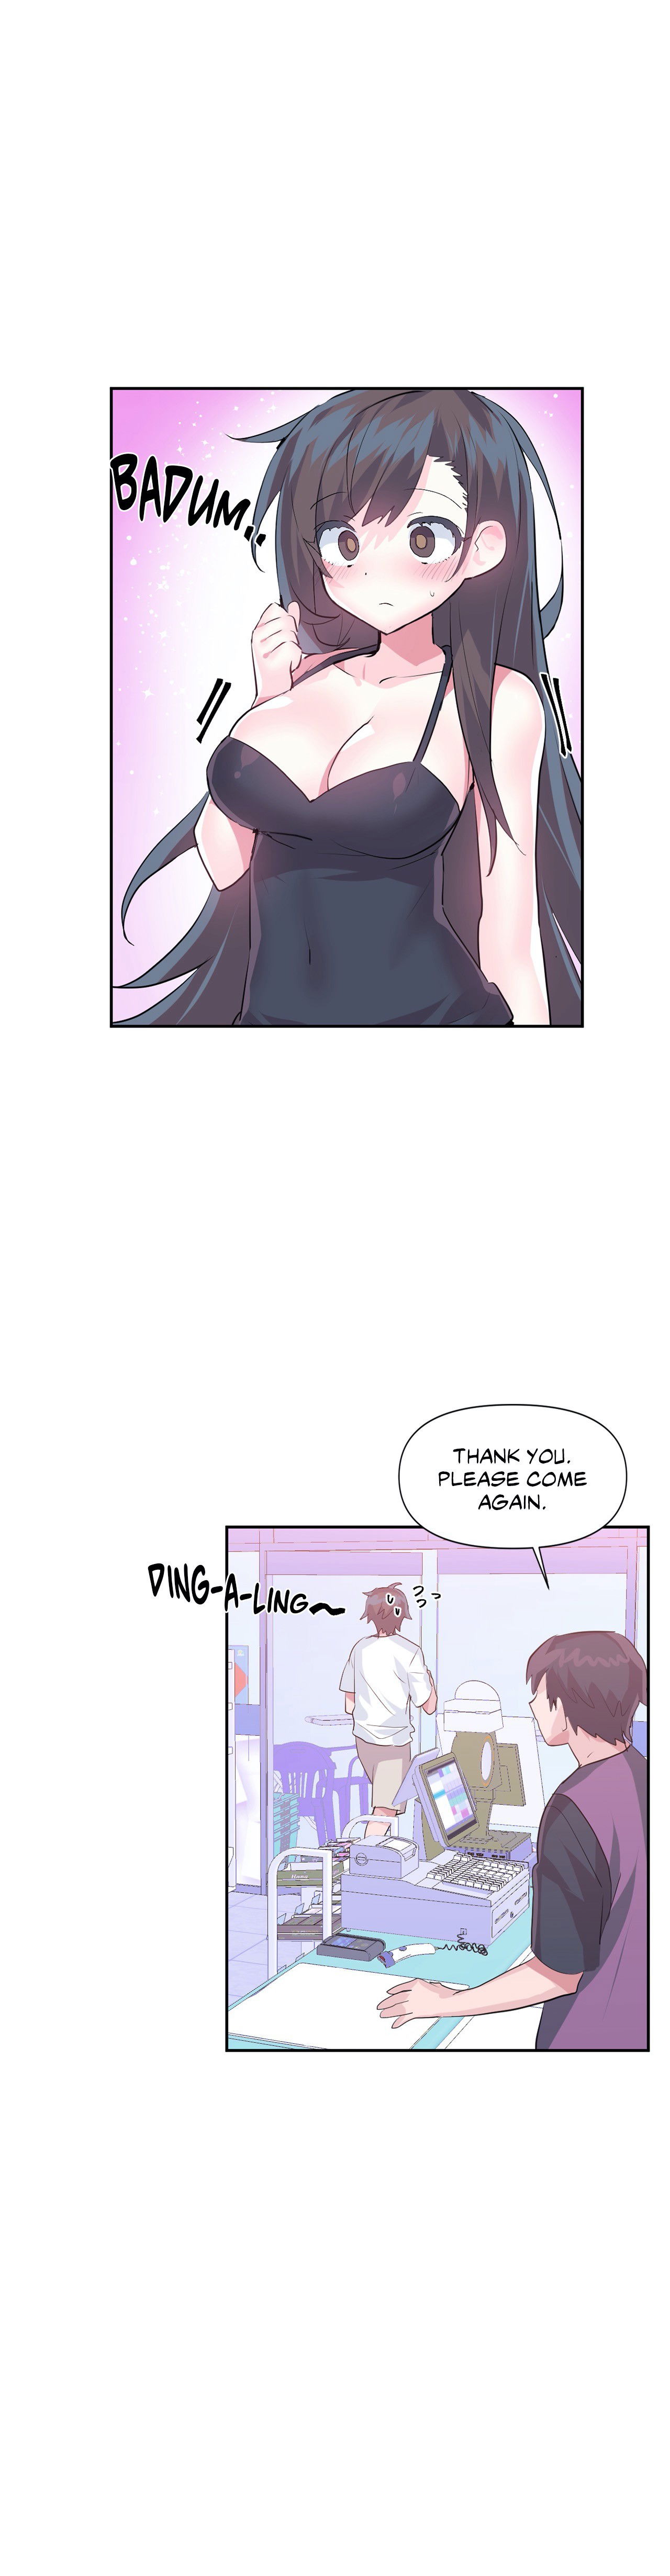 log-in-to-lust-a-land-chap-33-14